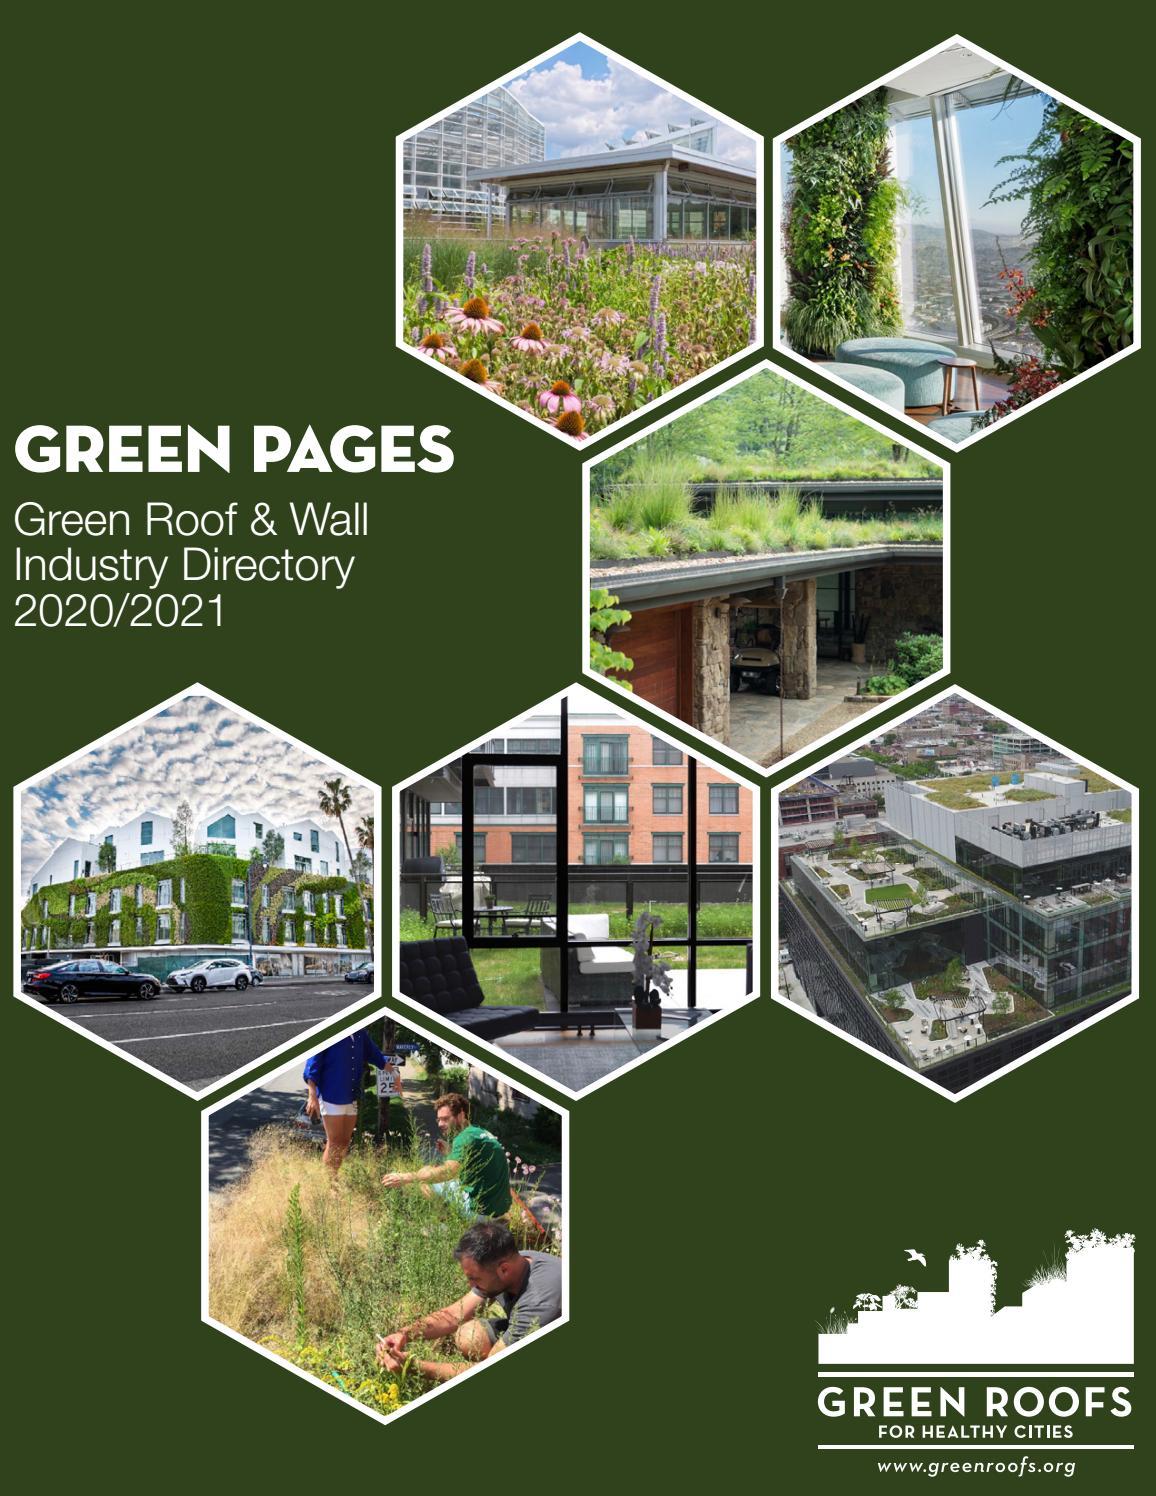 The Green Pages: Green Roof & Wall Industry Directory 2022 is Now Available Online